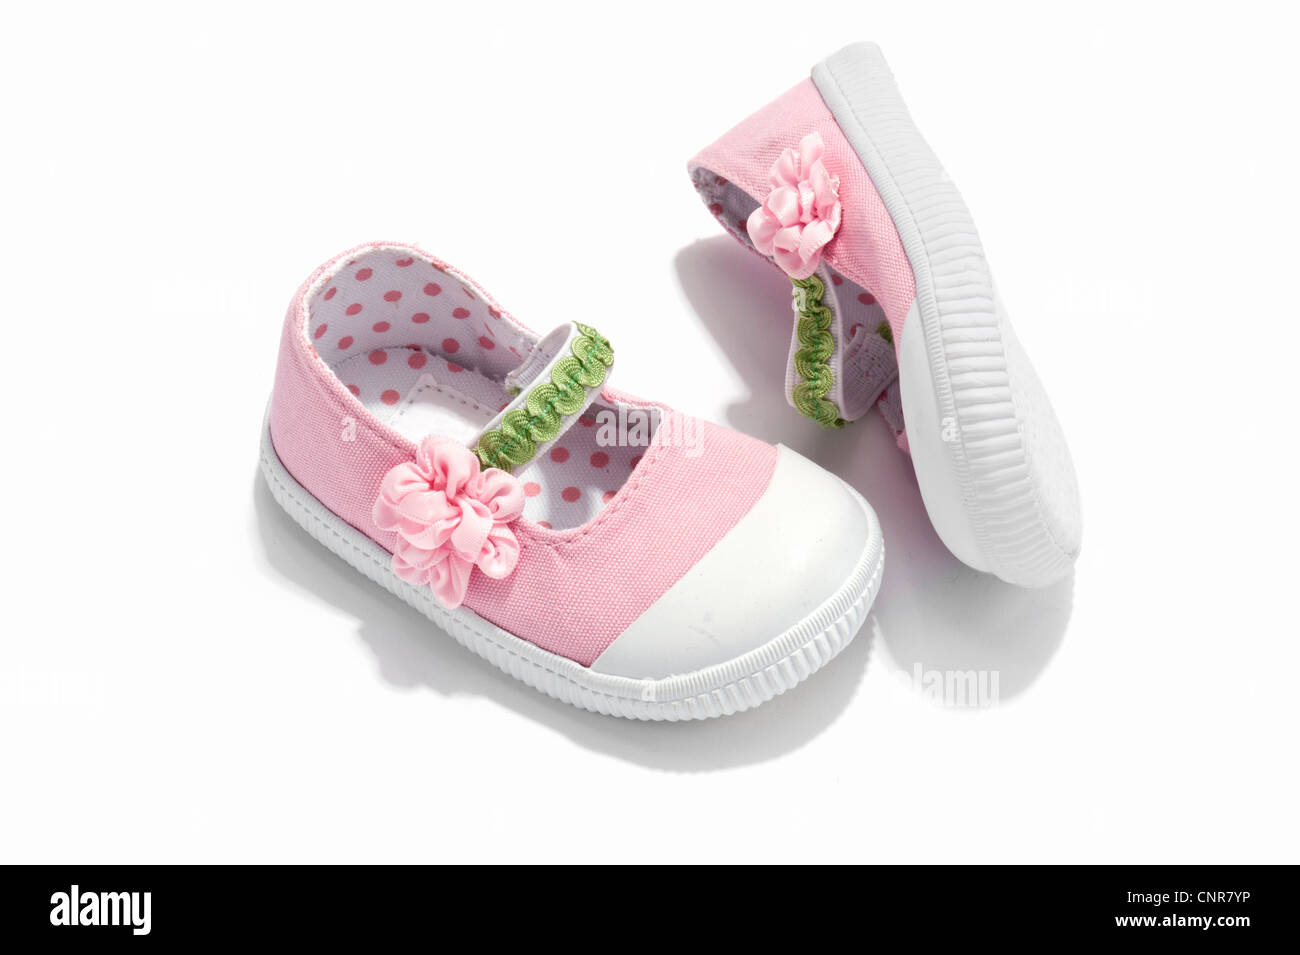 A pair of pink baby shoes Stock Photo - Alamy